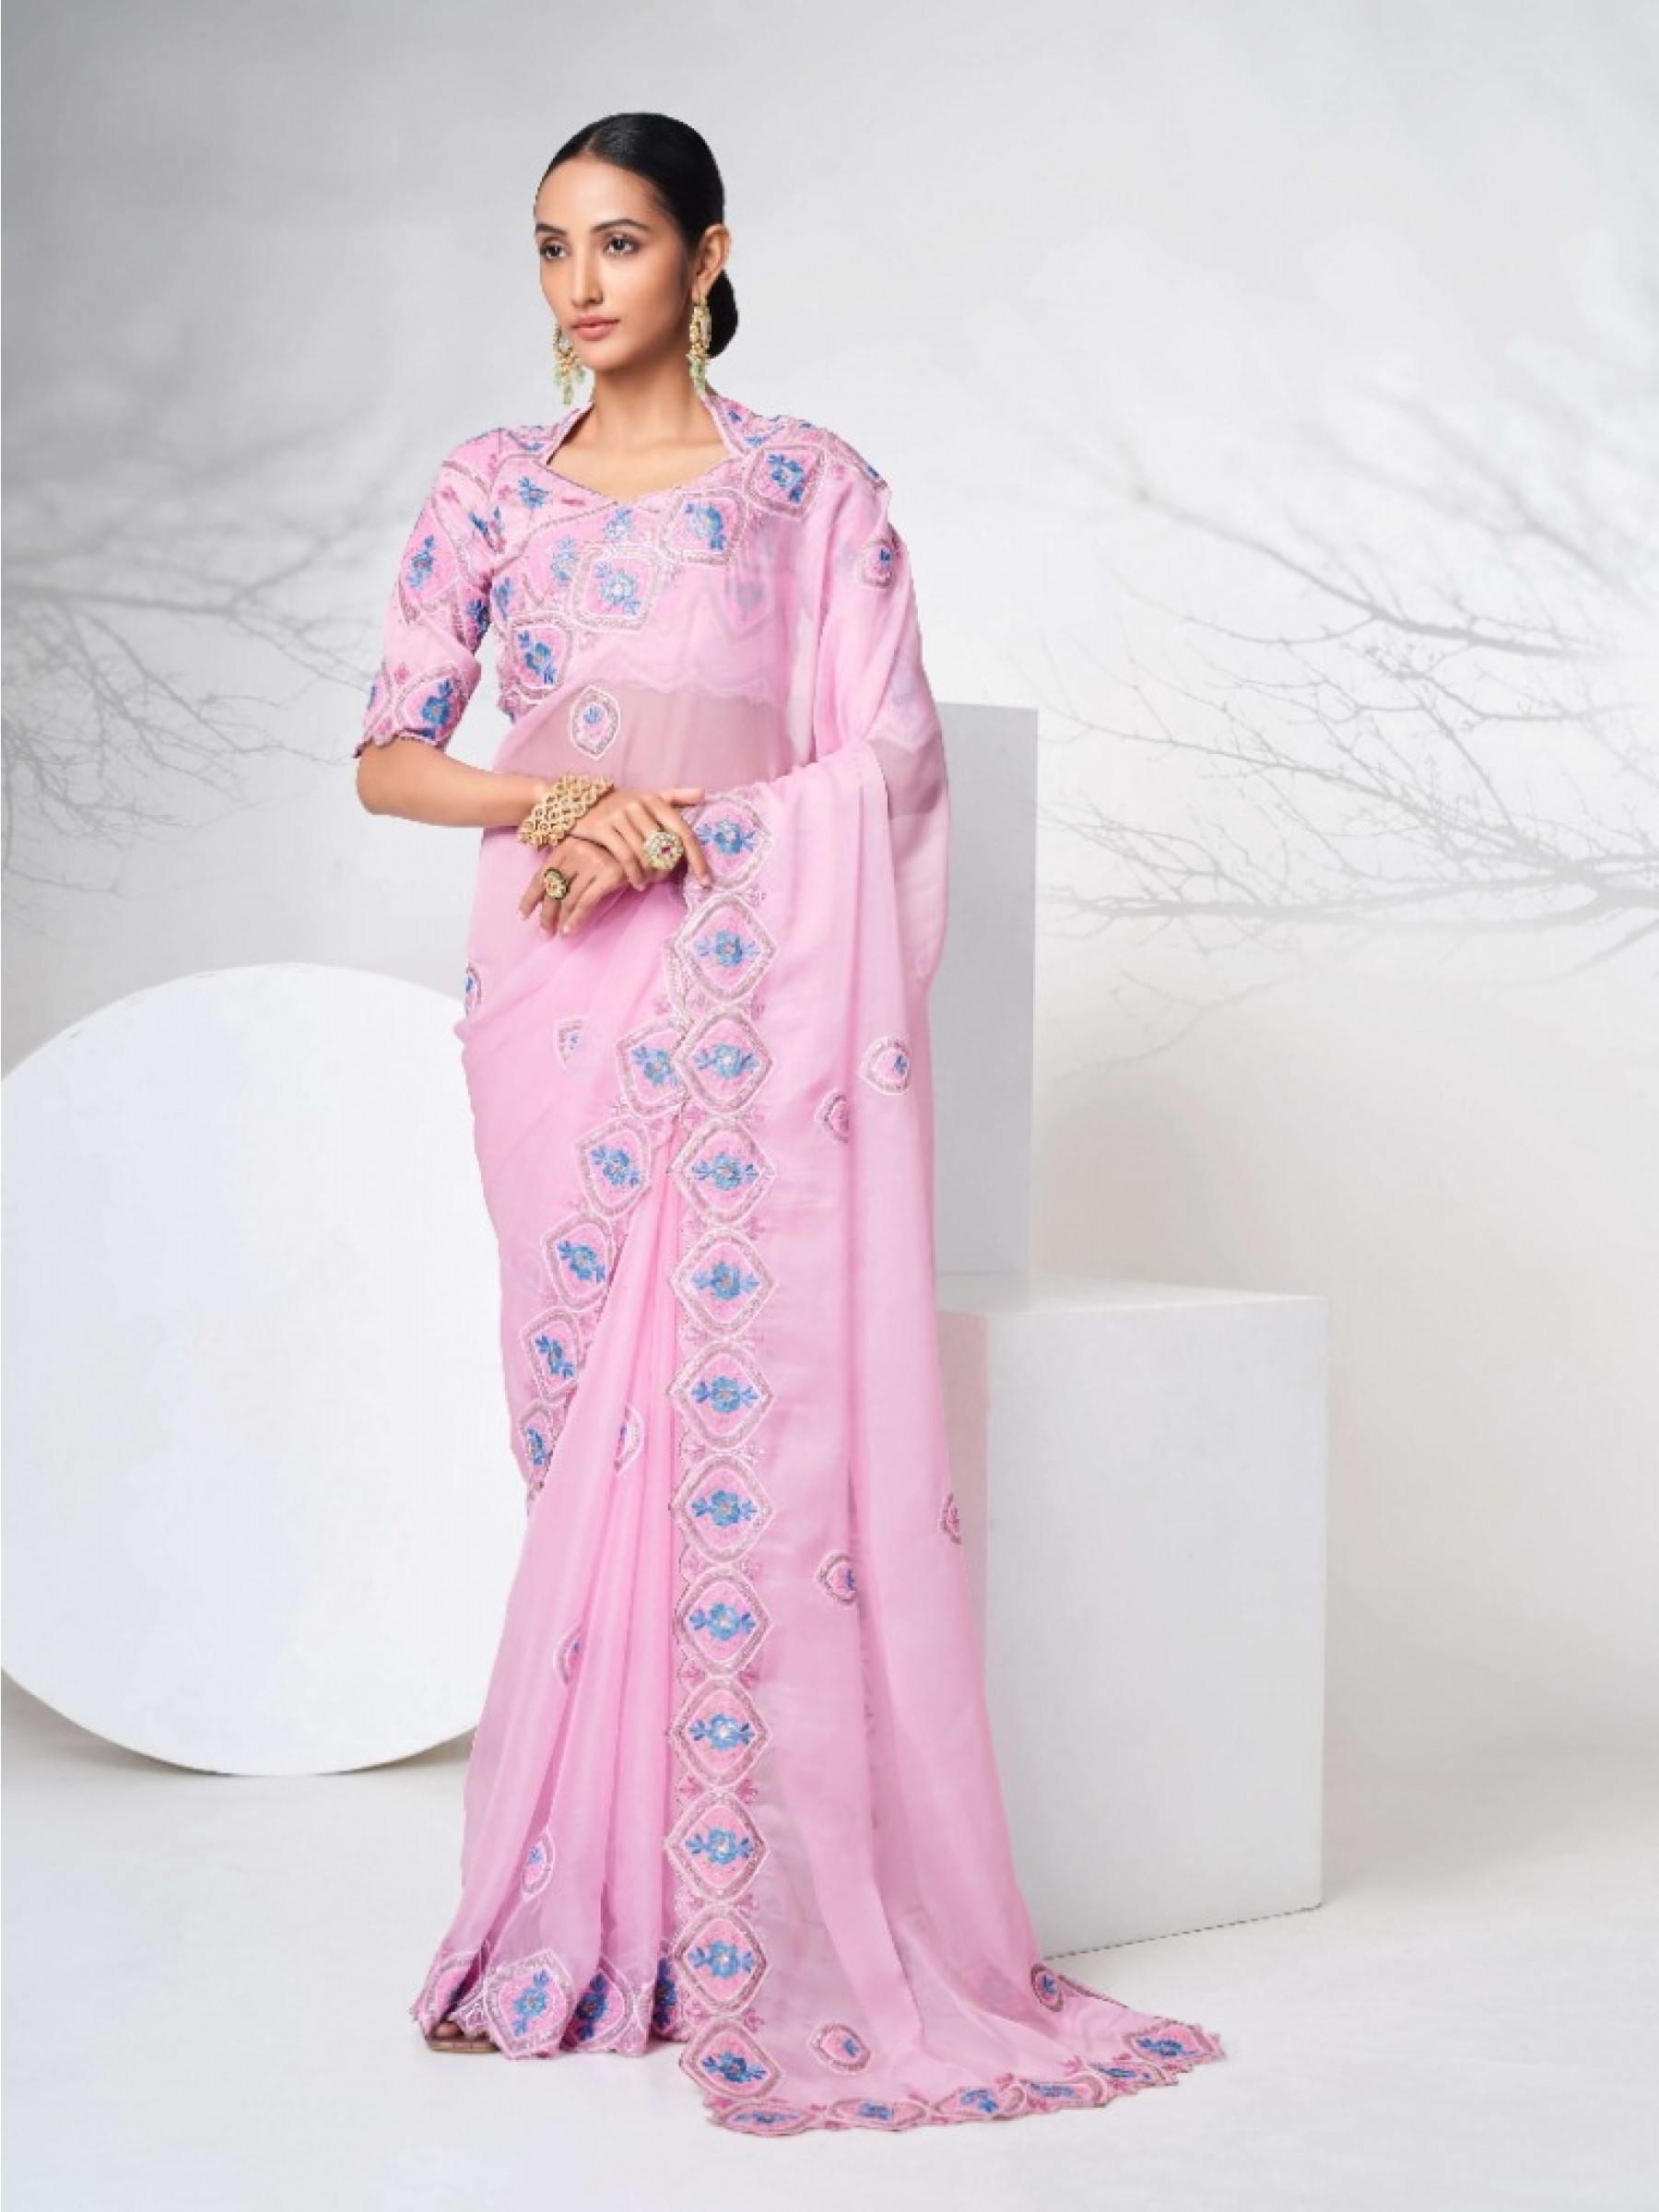 Organza silk  Saree Pink Color With Embroidery Work